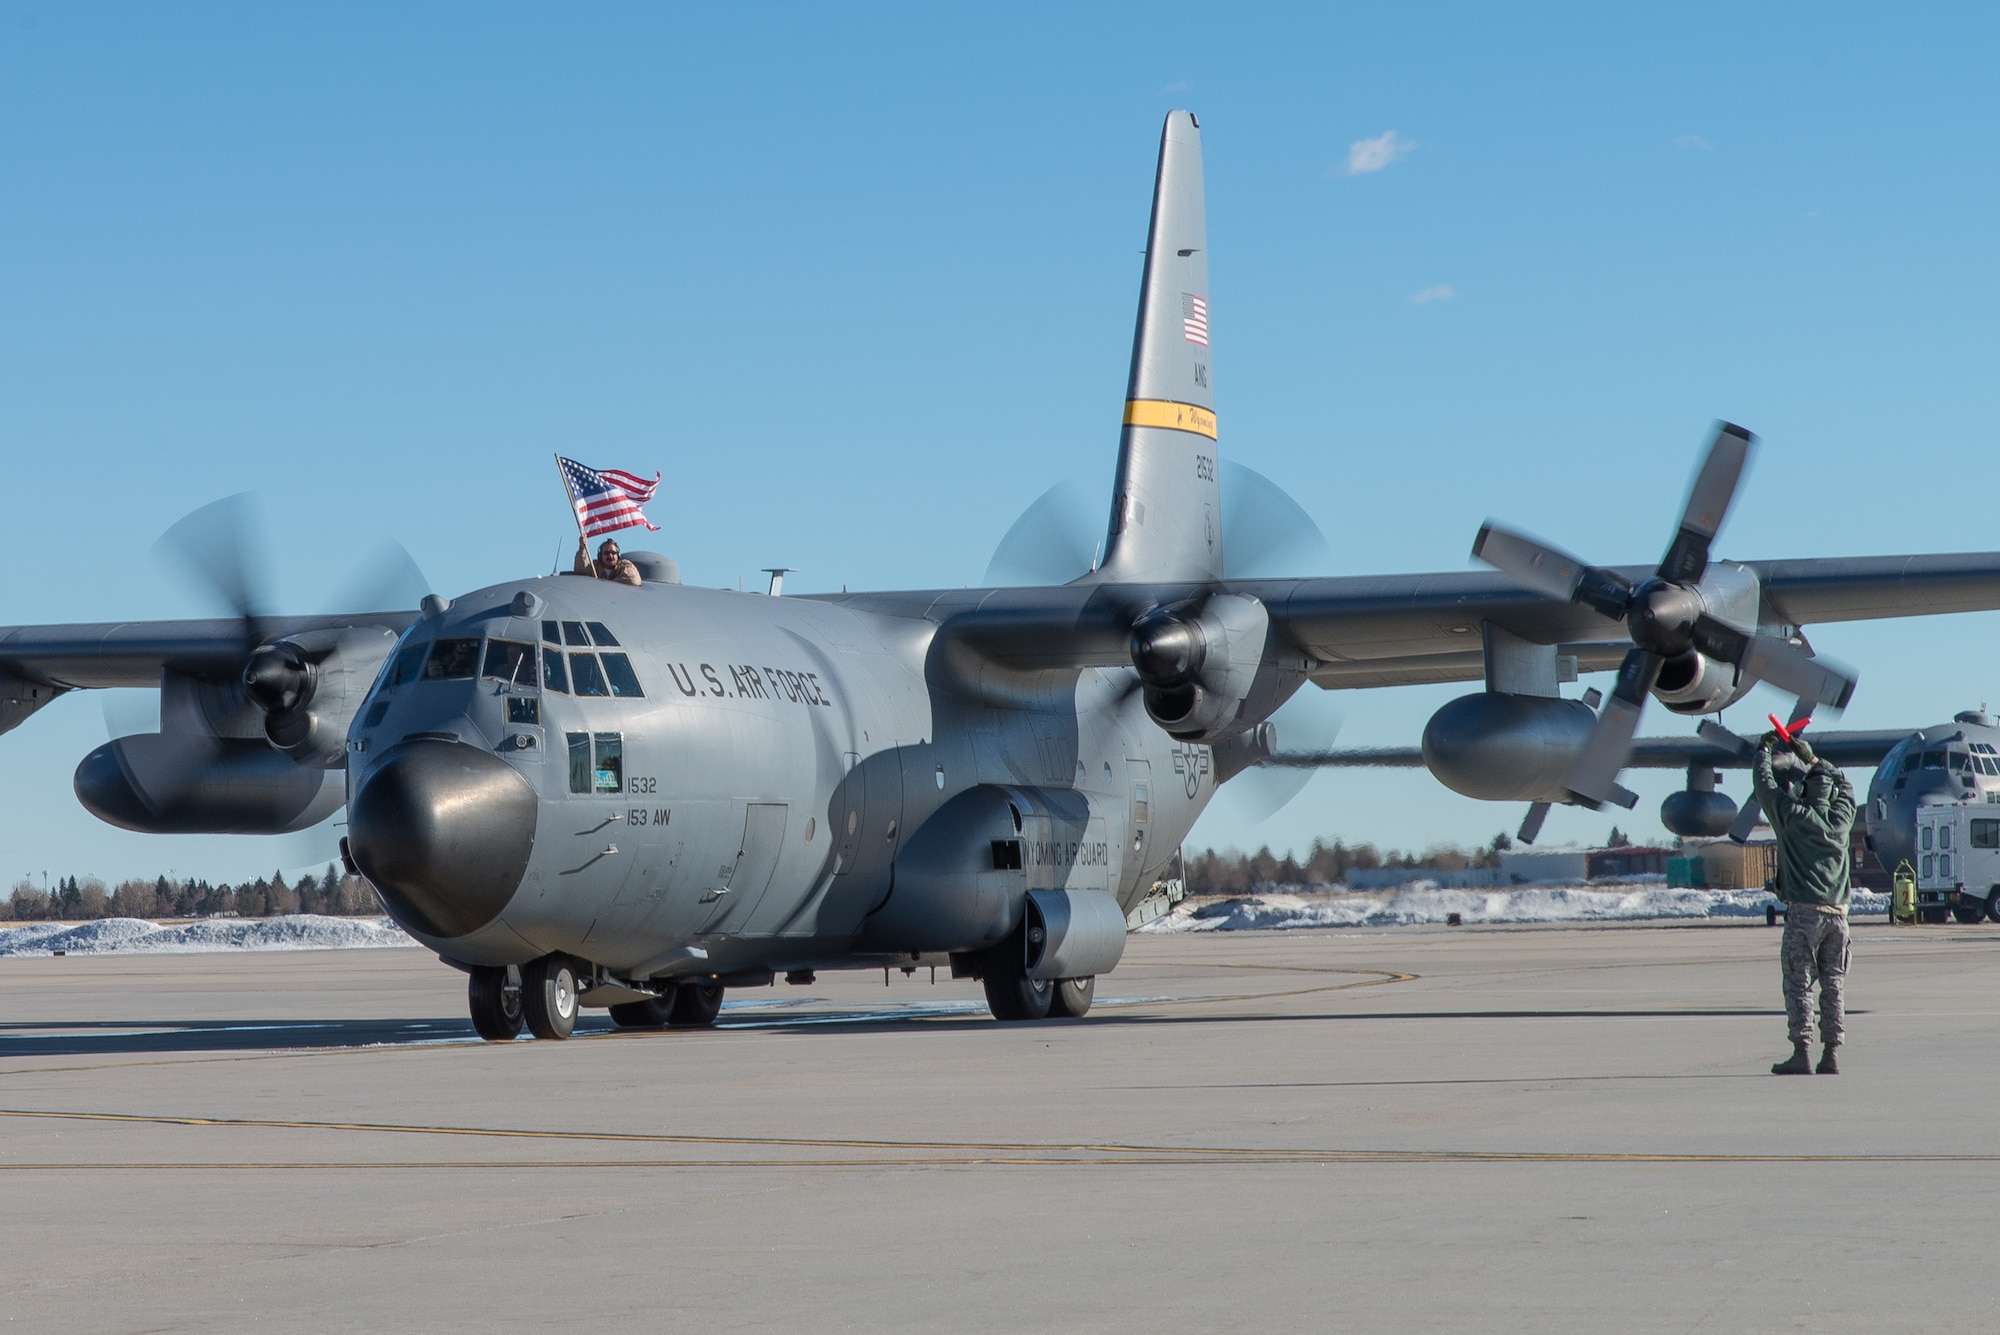 A U.S. Air Force C-130H Hercules aircraft parks on the ramp at Cheyenne Air National Guard Base in Cheyenne, Wyoming. Around 60 members of the 153rd Airlift Wing, Wyoming Air National Guard, returned home this week following a two-month deployment to Southwest Asia